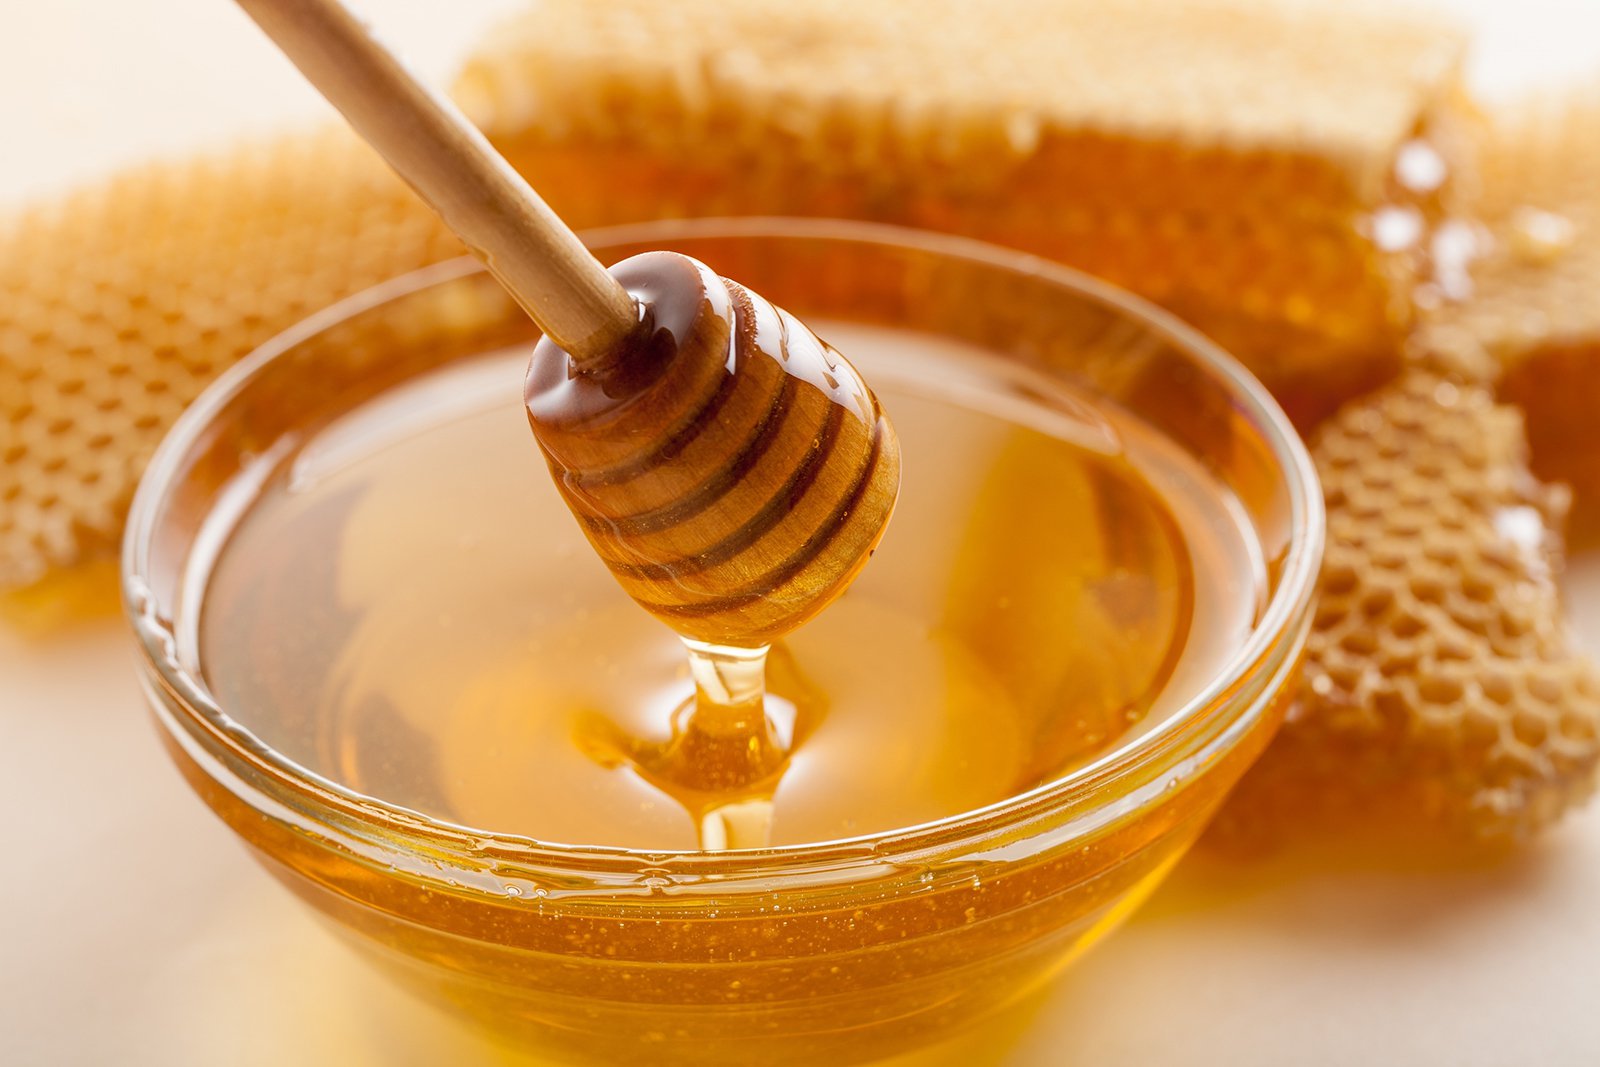 Honey is a source of energy